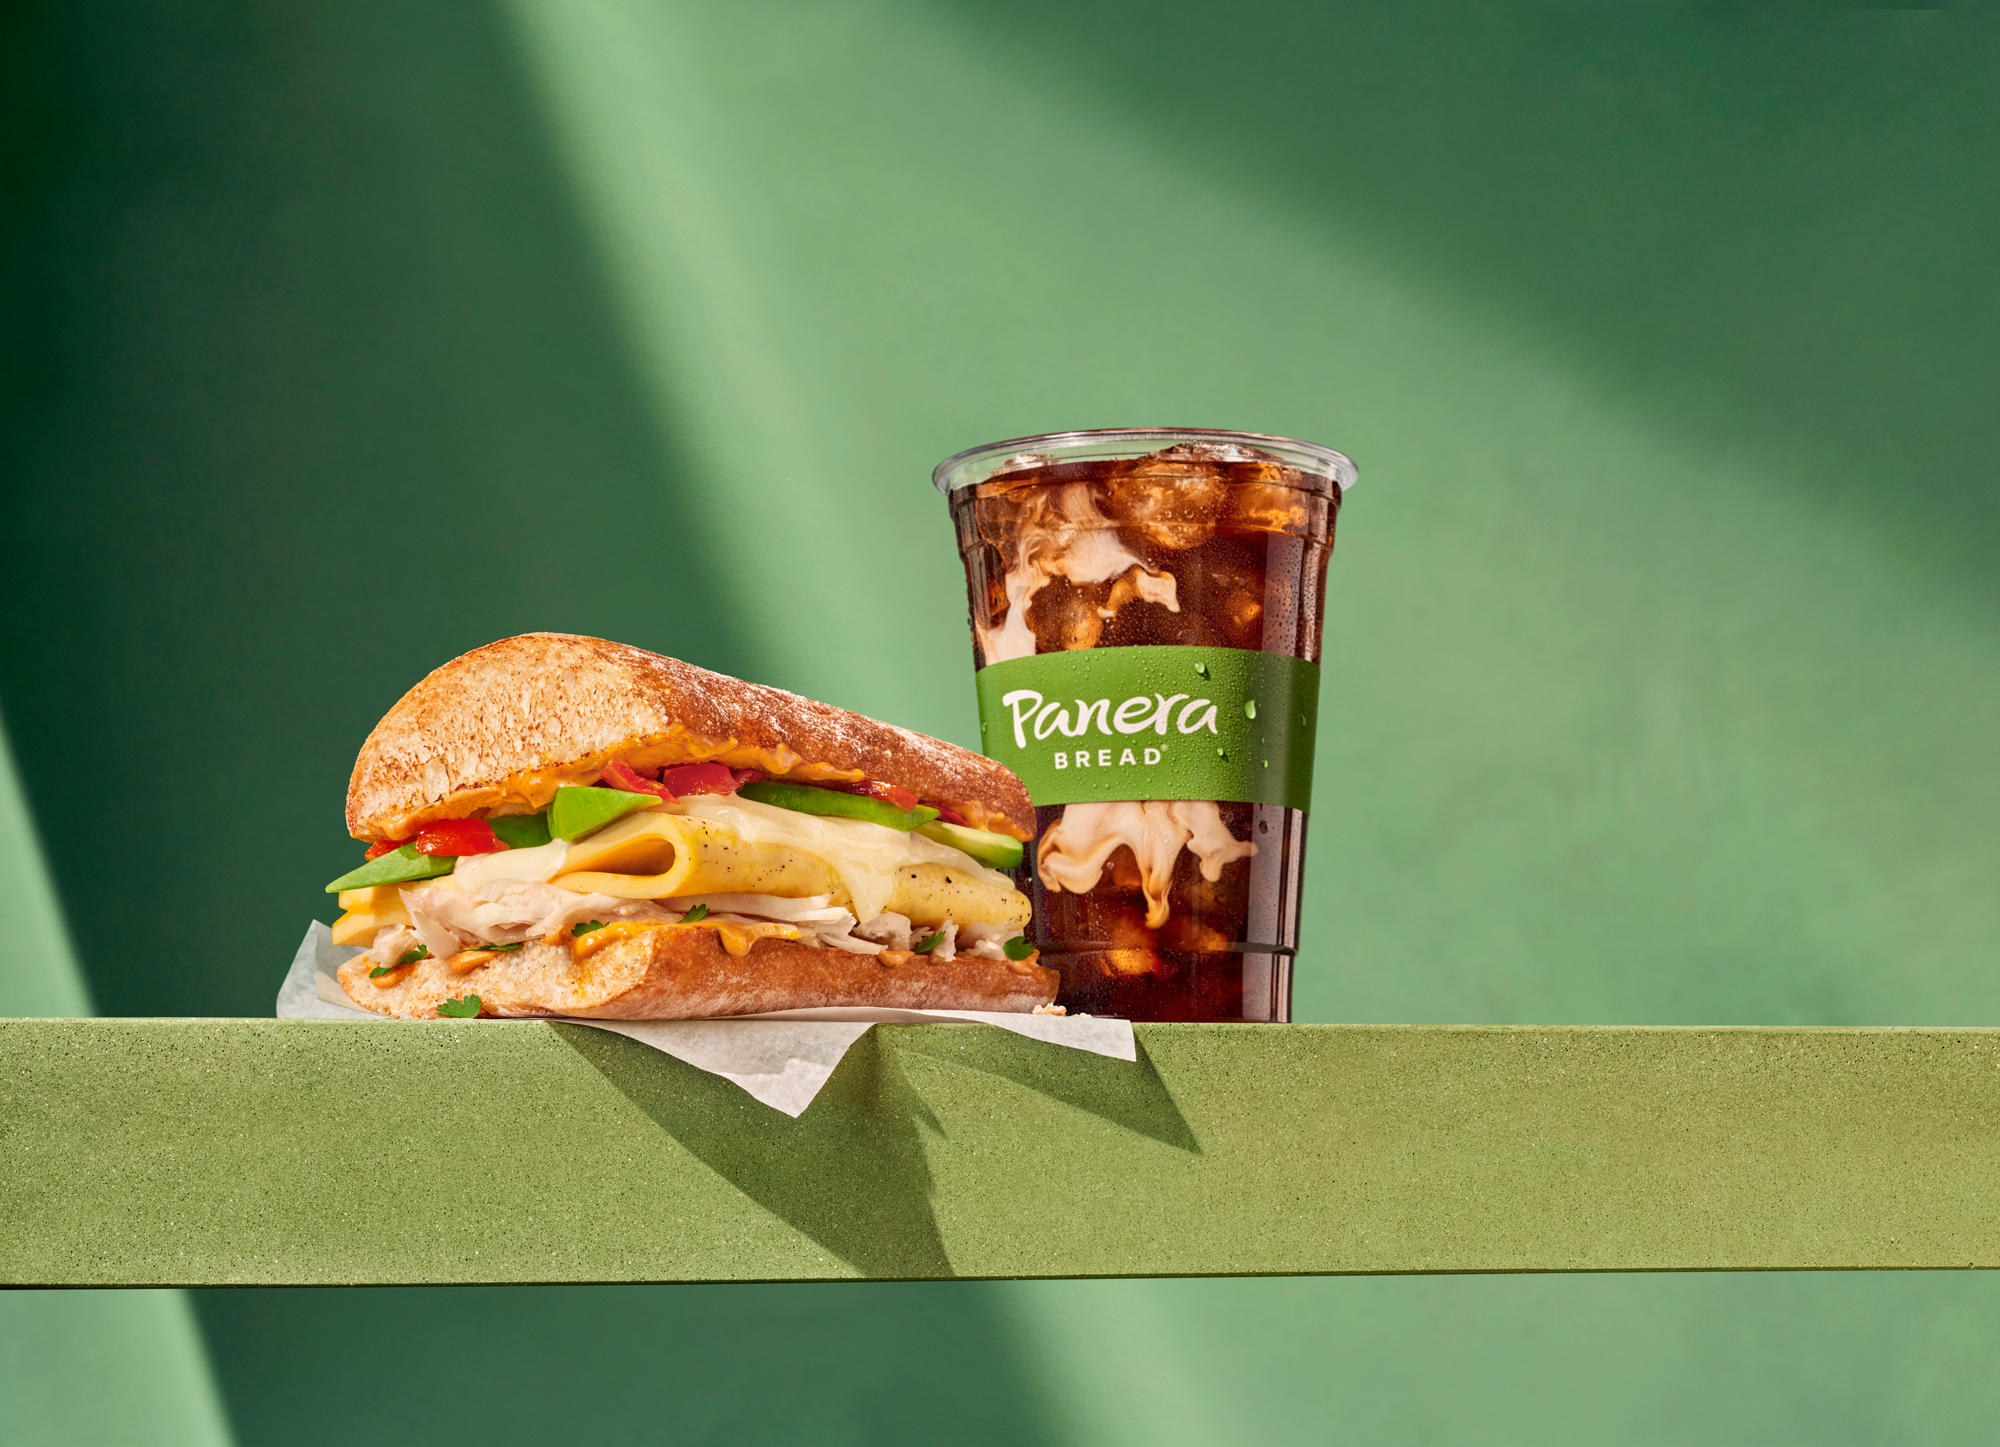 Chipotle Chicken, Egg & Avo and Iced Cafe Blend Dark Coffee Panera Bread Ames (515)956-4580